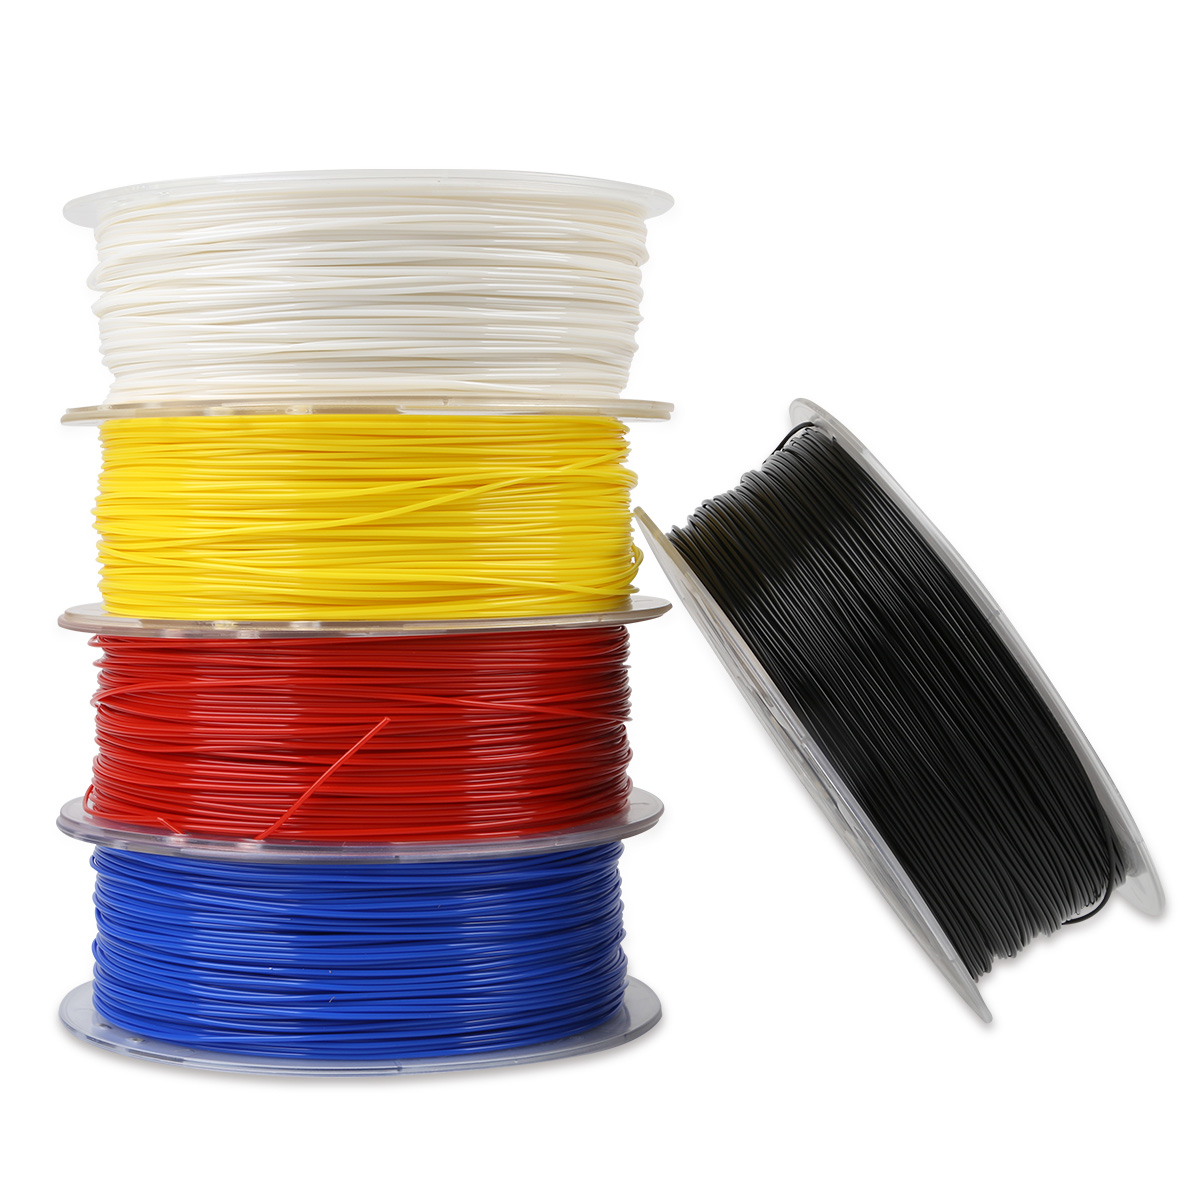 Creality 3D® White/Black/Yellow/Blue/Red 1KG 1.75mm PLA Filament For 3D Printer 15